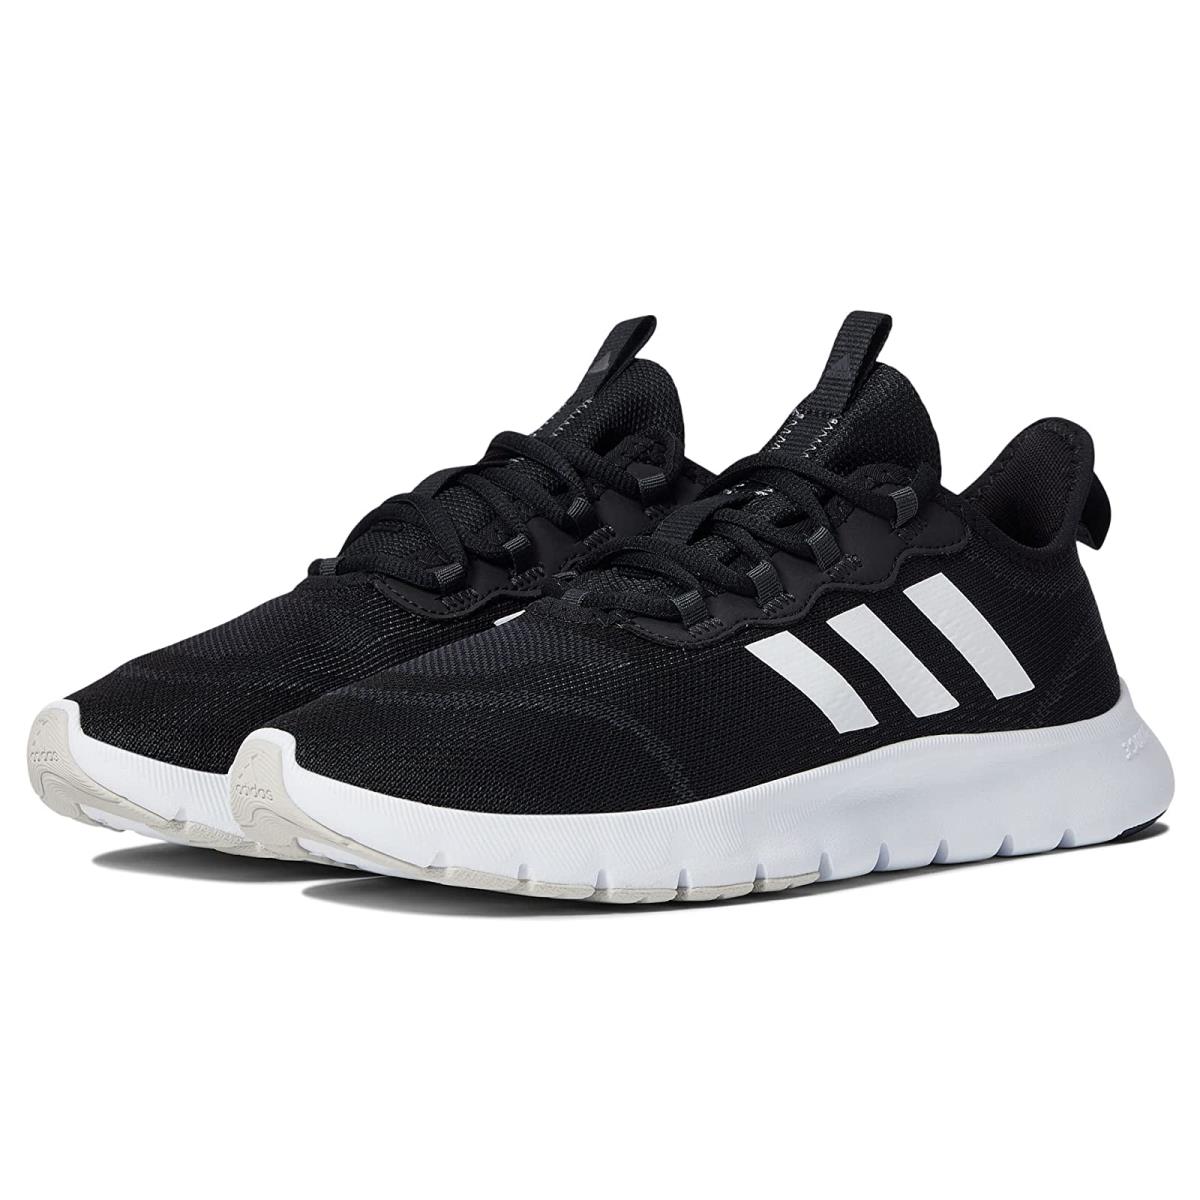 Woman`s Sneakers Athletic Shoes Adidas Running Vario Sport Black/White/Grey One